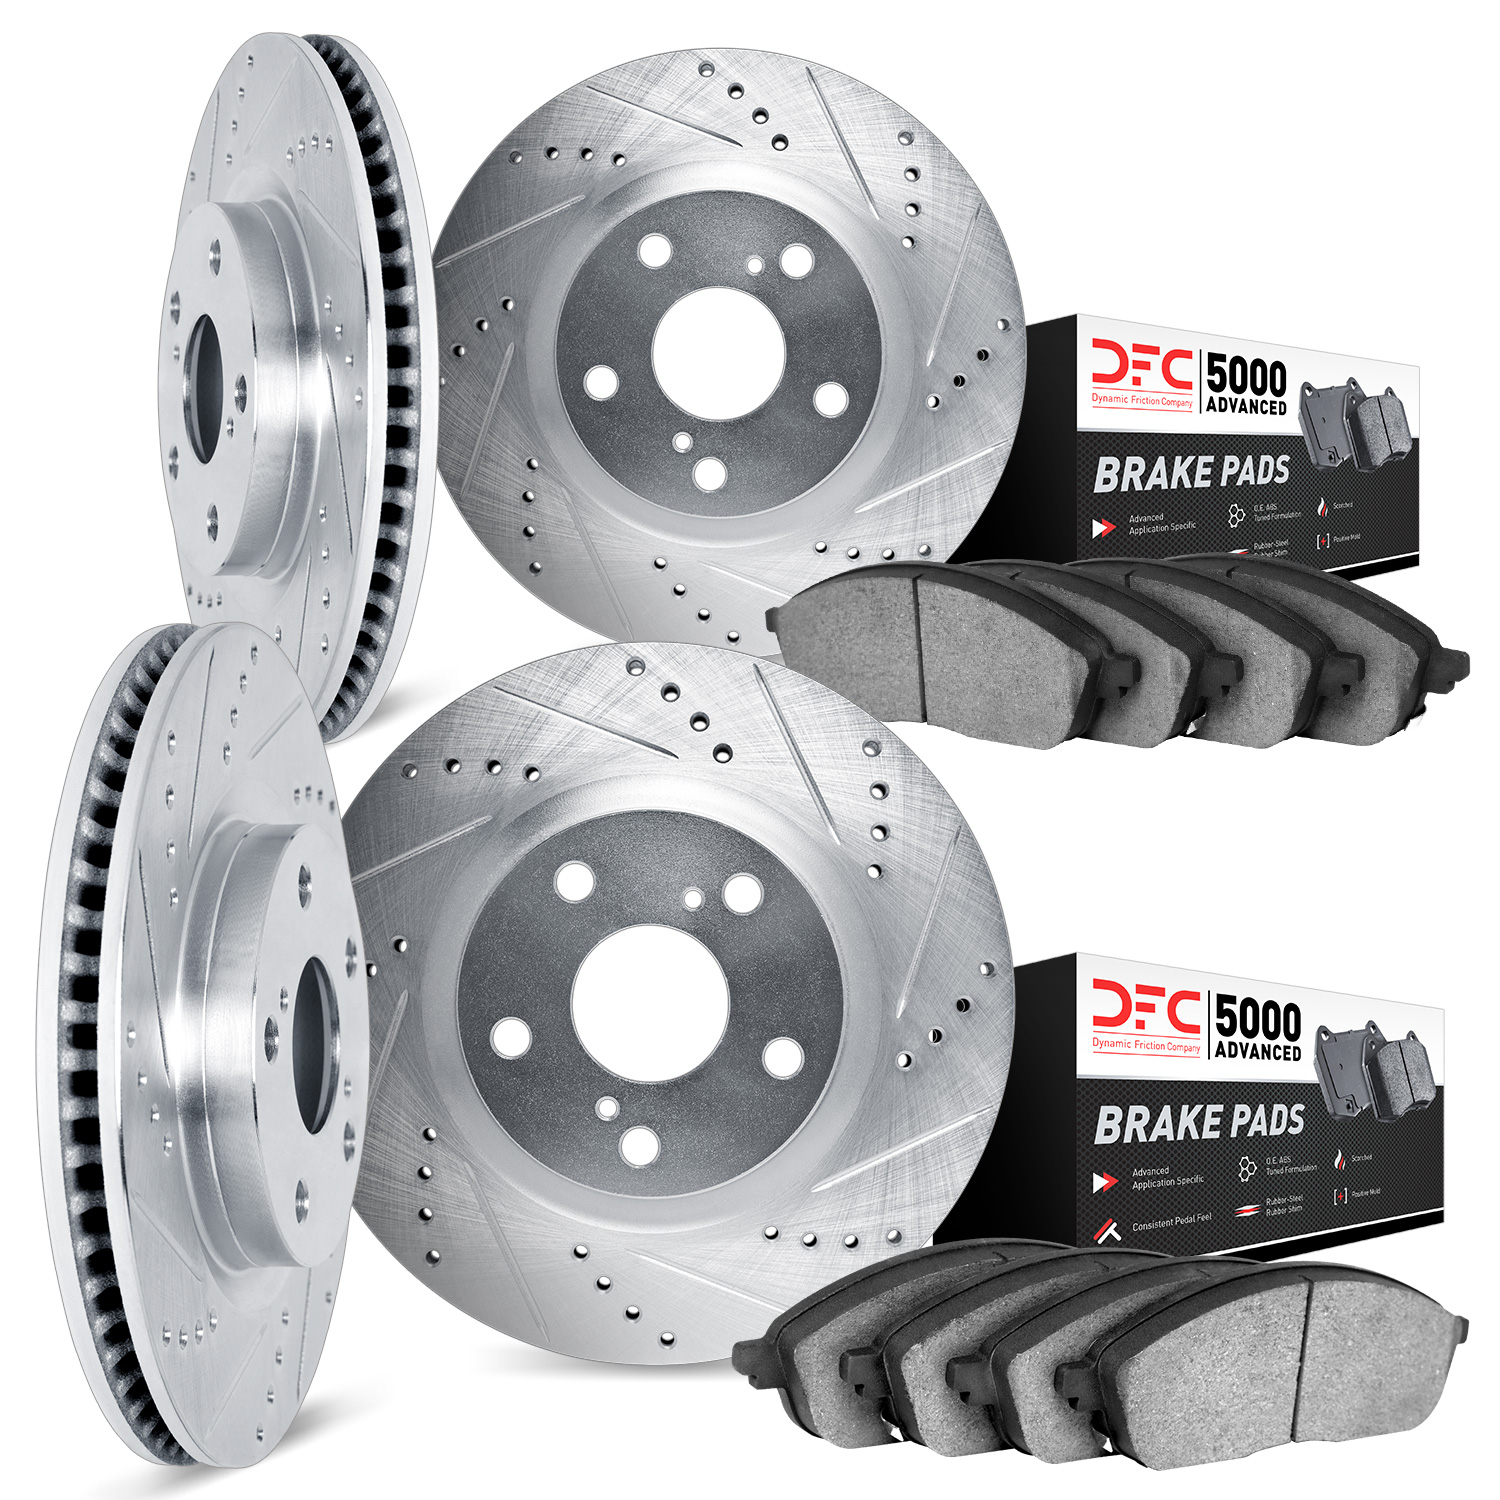 7504-31053 Drilled/Slotted Brake Rotors w/5000 Advanced Brake Pads Kit [Silver], 2017-2019 BMW, Position: Front and Rear